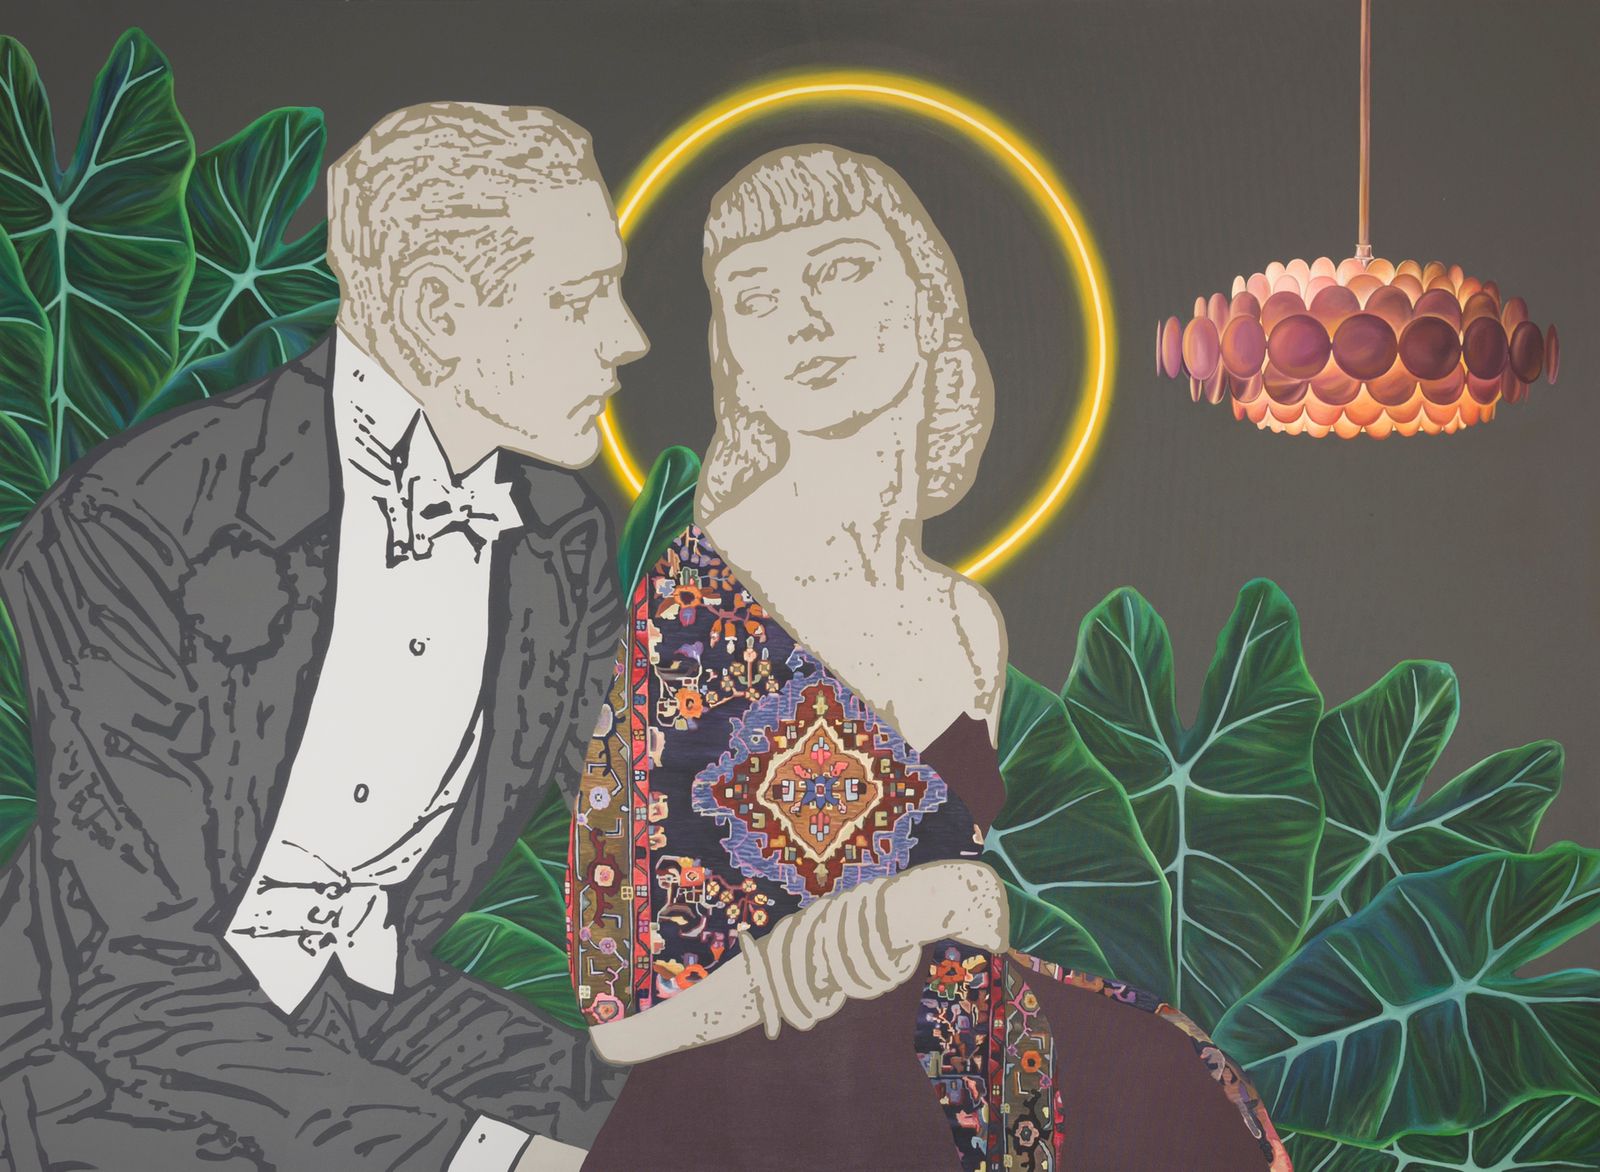 The 1000 +1 exhibition explores a universe of love and divinity